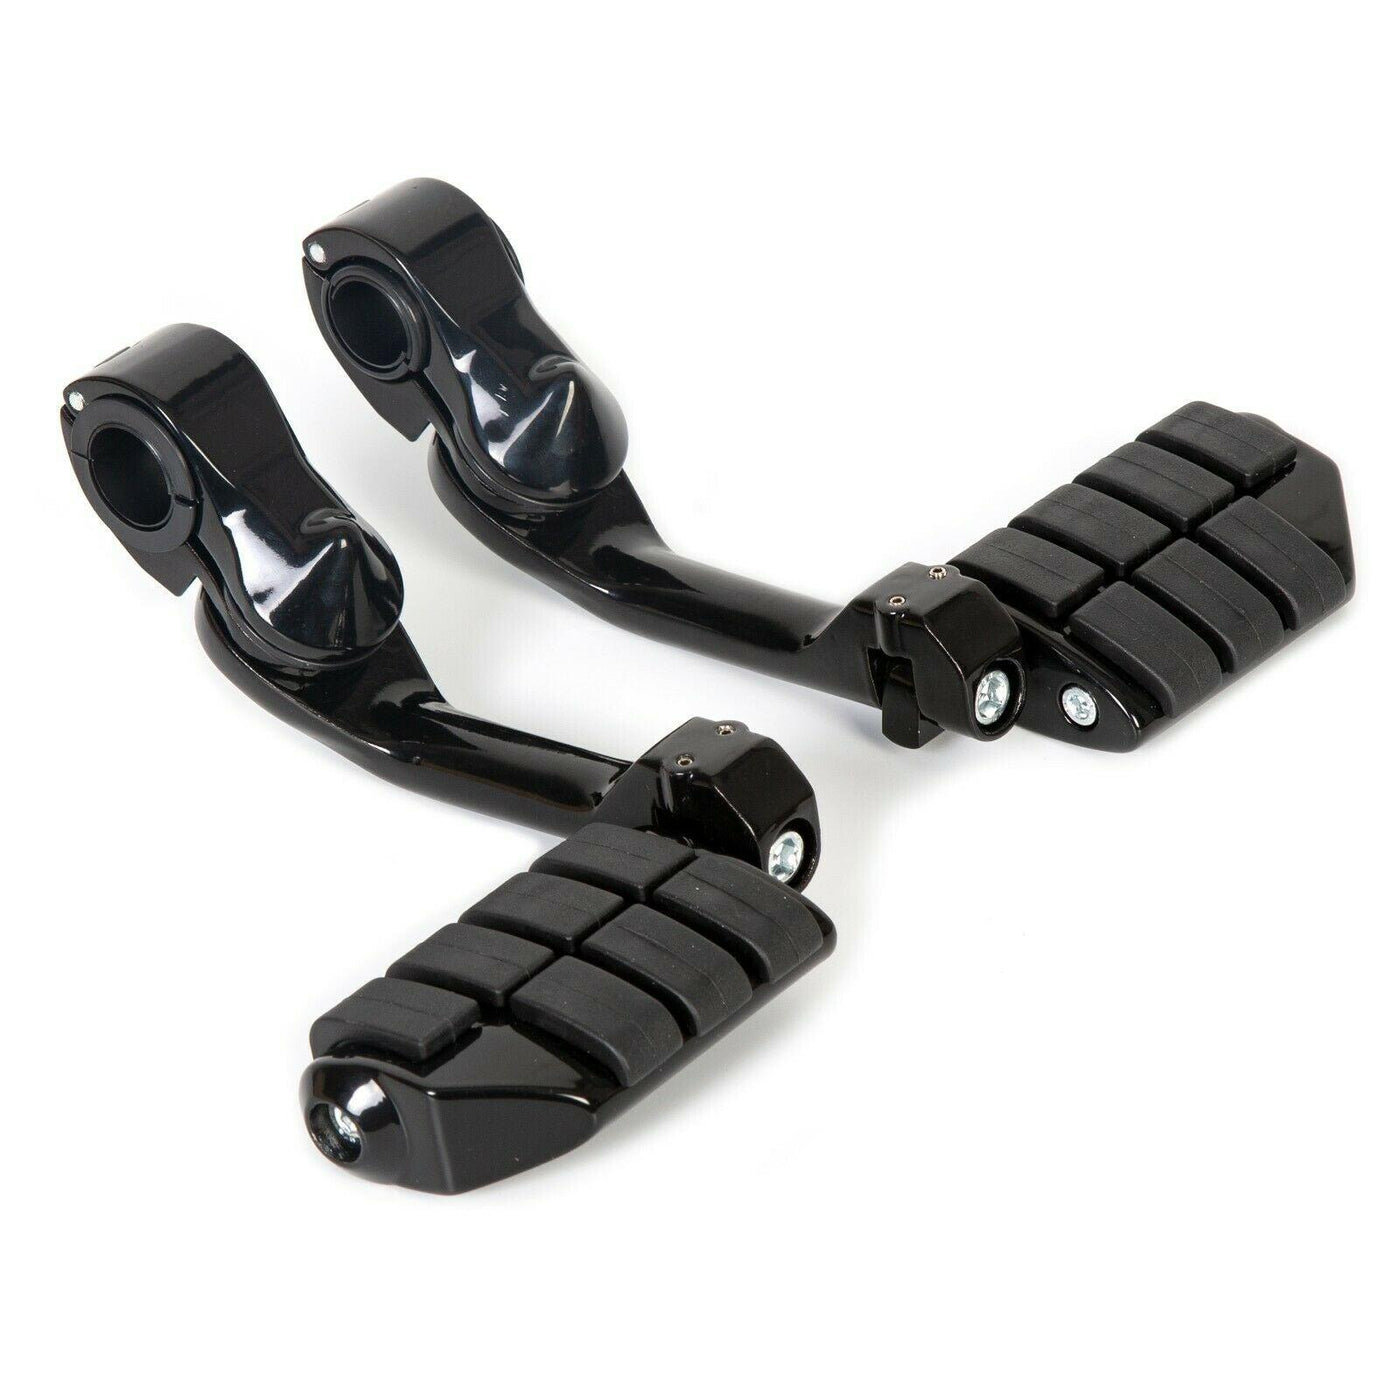 Highway Engine Guards Long Angled Mount Foot Pegs For Harley Davidson 1-1/4" - Moto Life Products